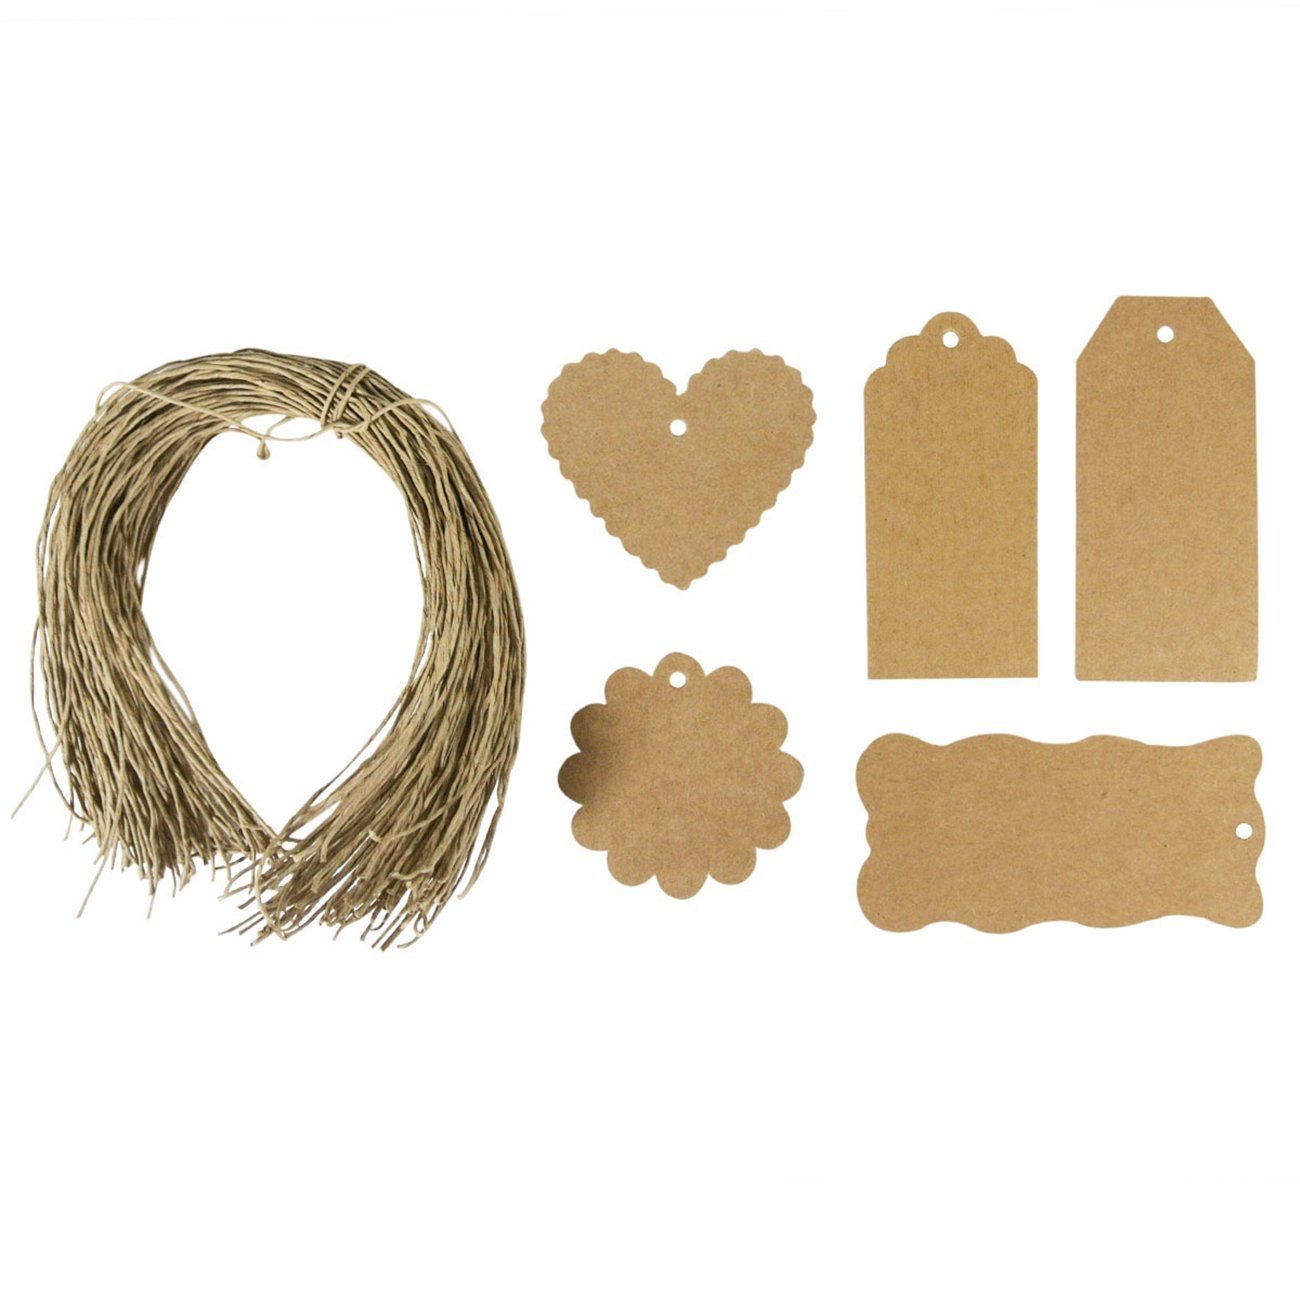 Wrapables 100 Gift Tags/ Kraft Hang Tags with Free Cut String